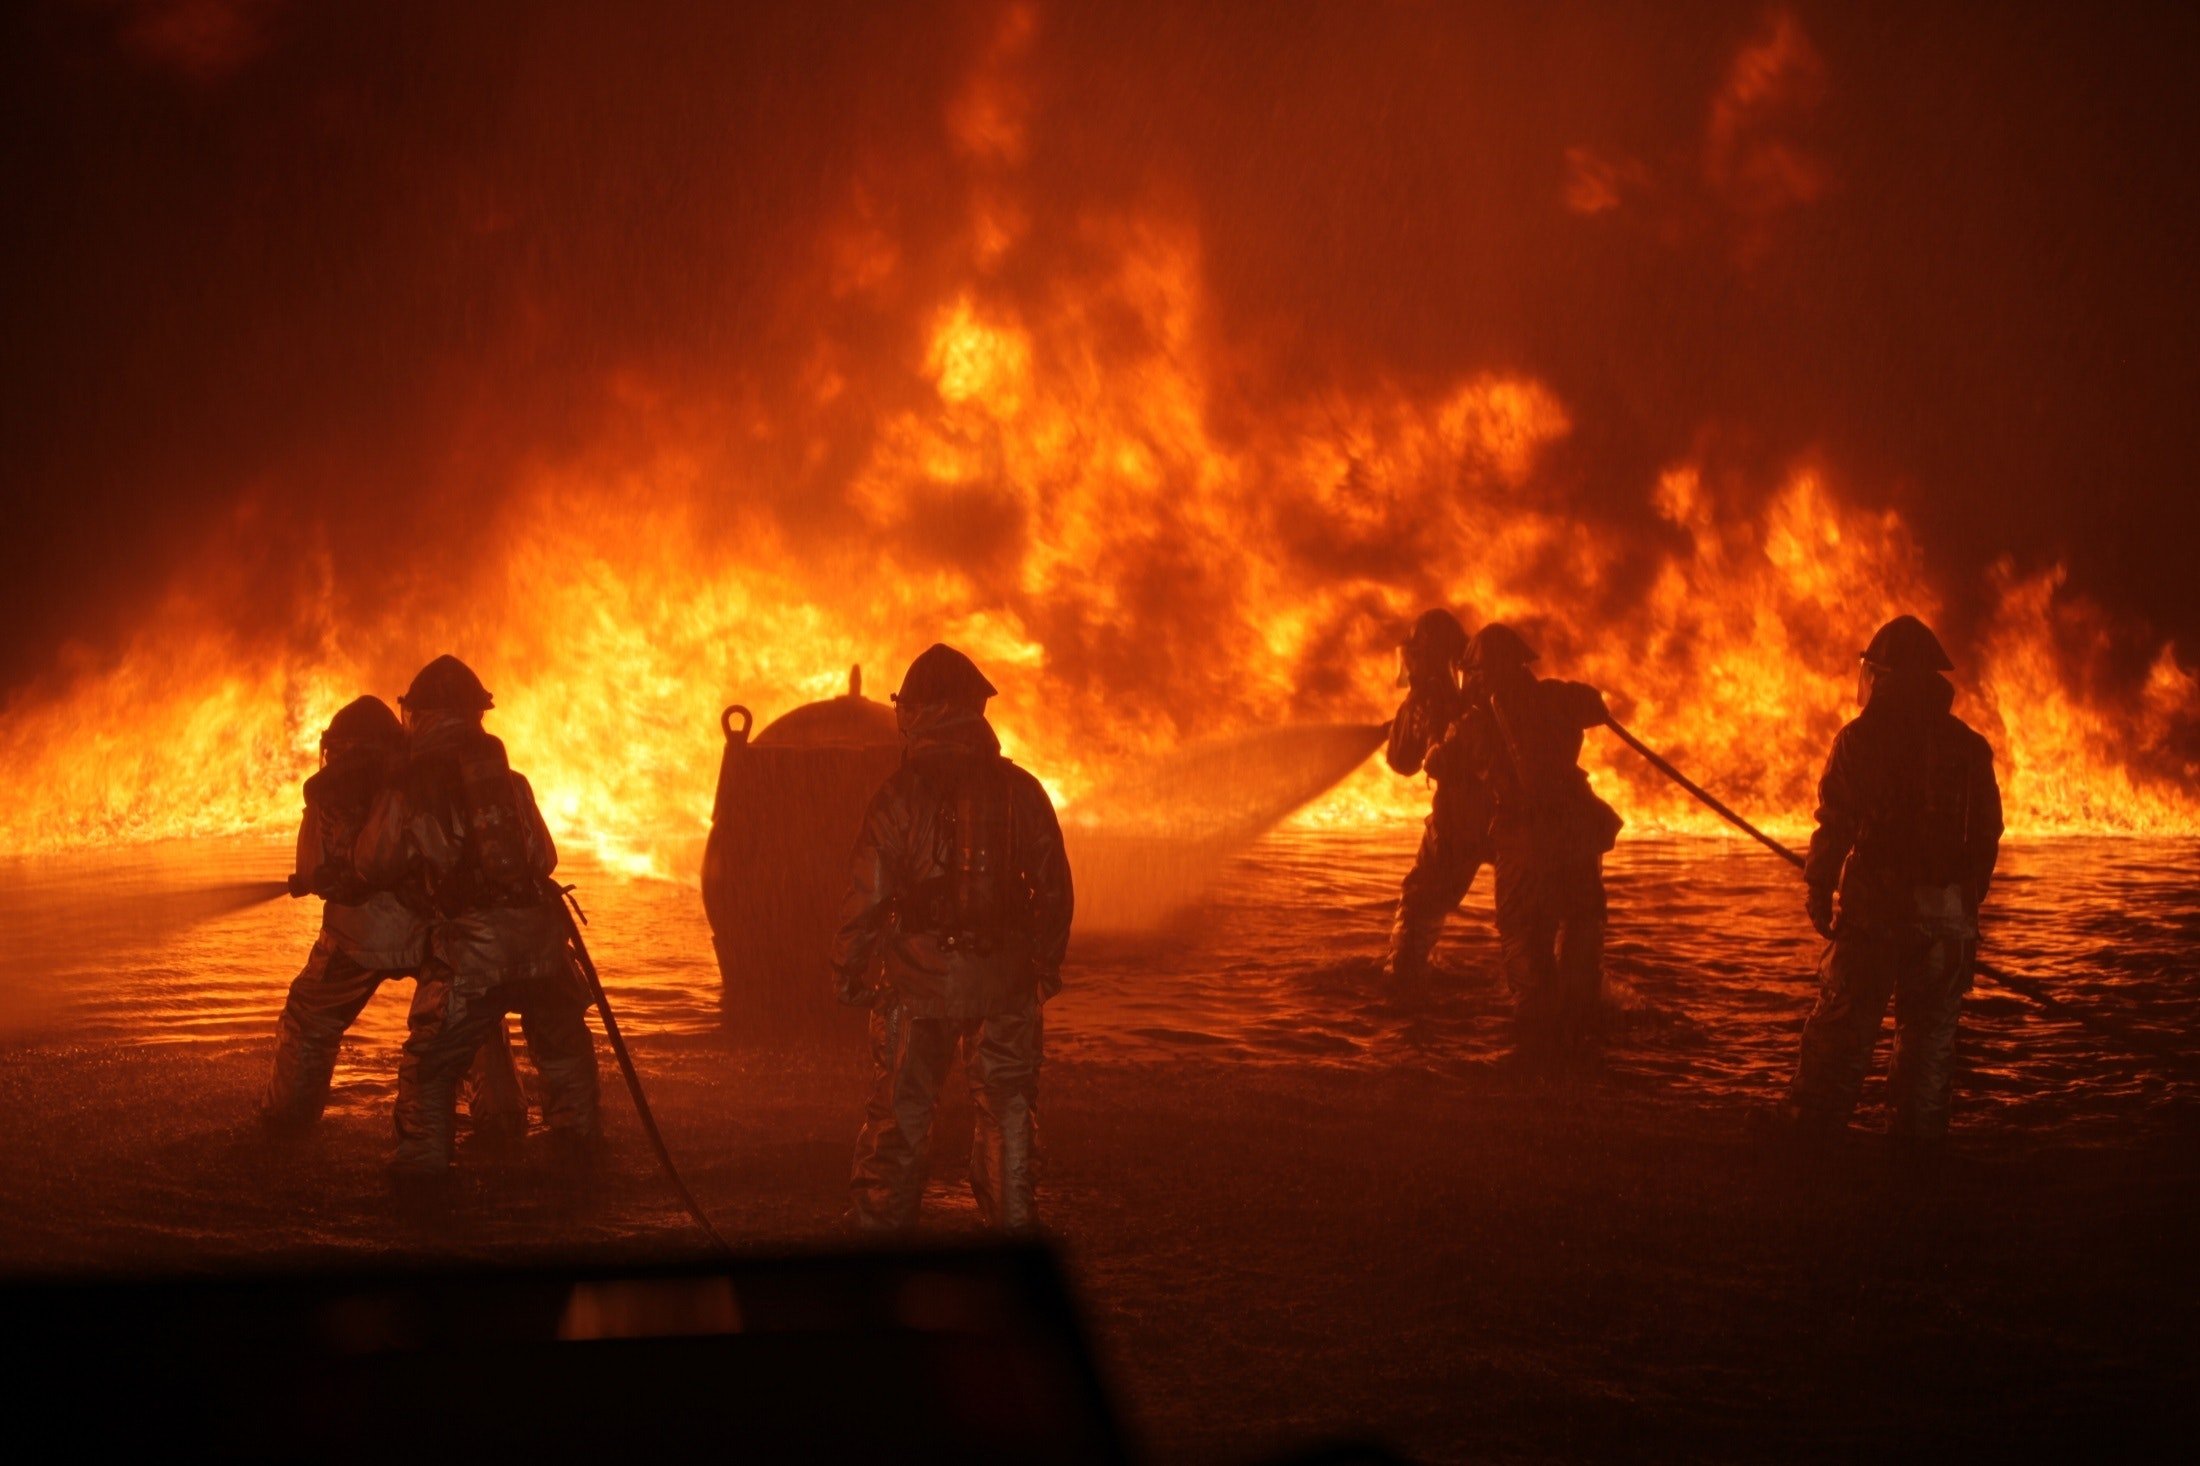 Firefighters trying to put out a wildfire | Source: Pexels